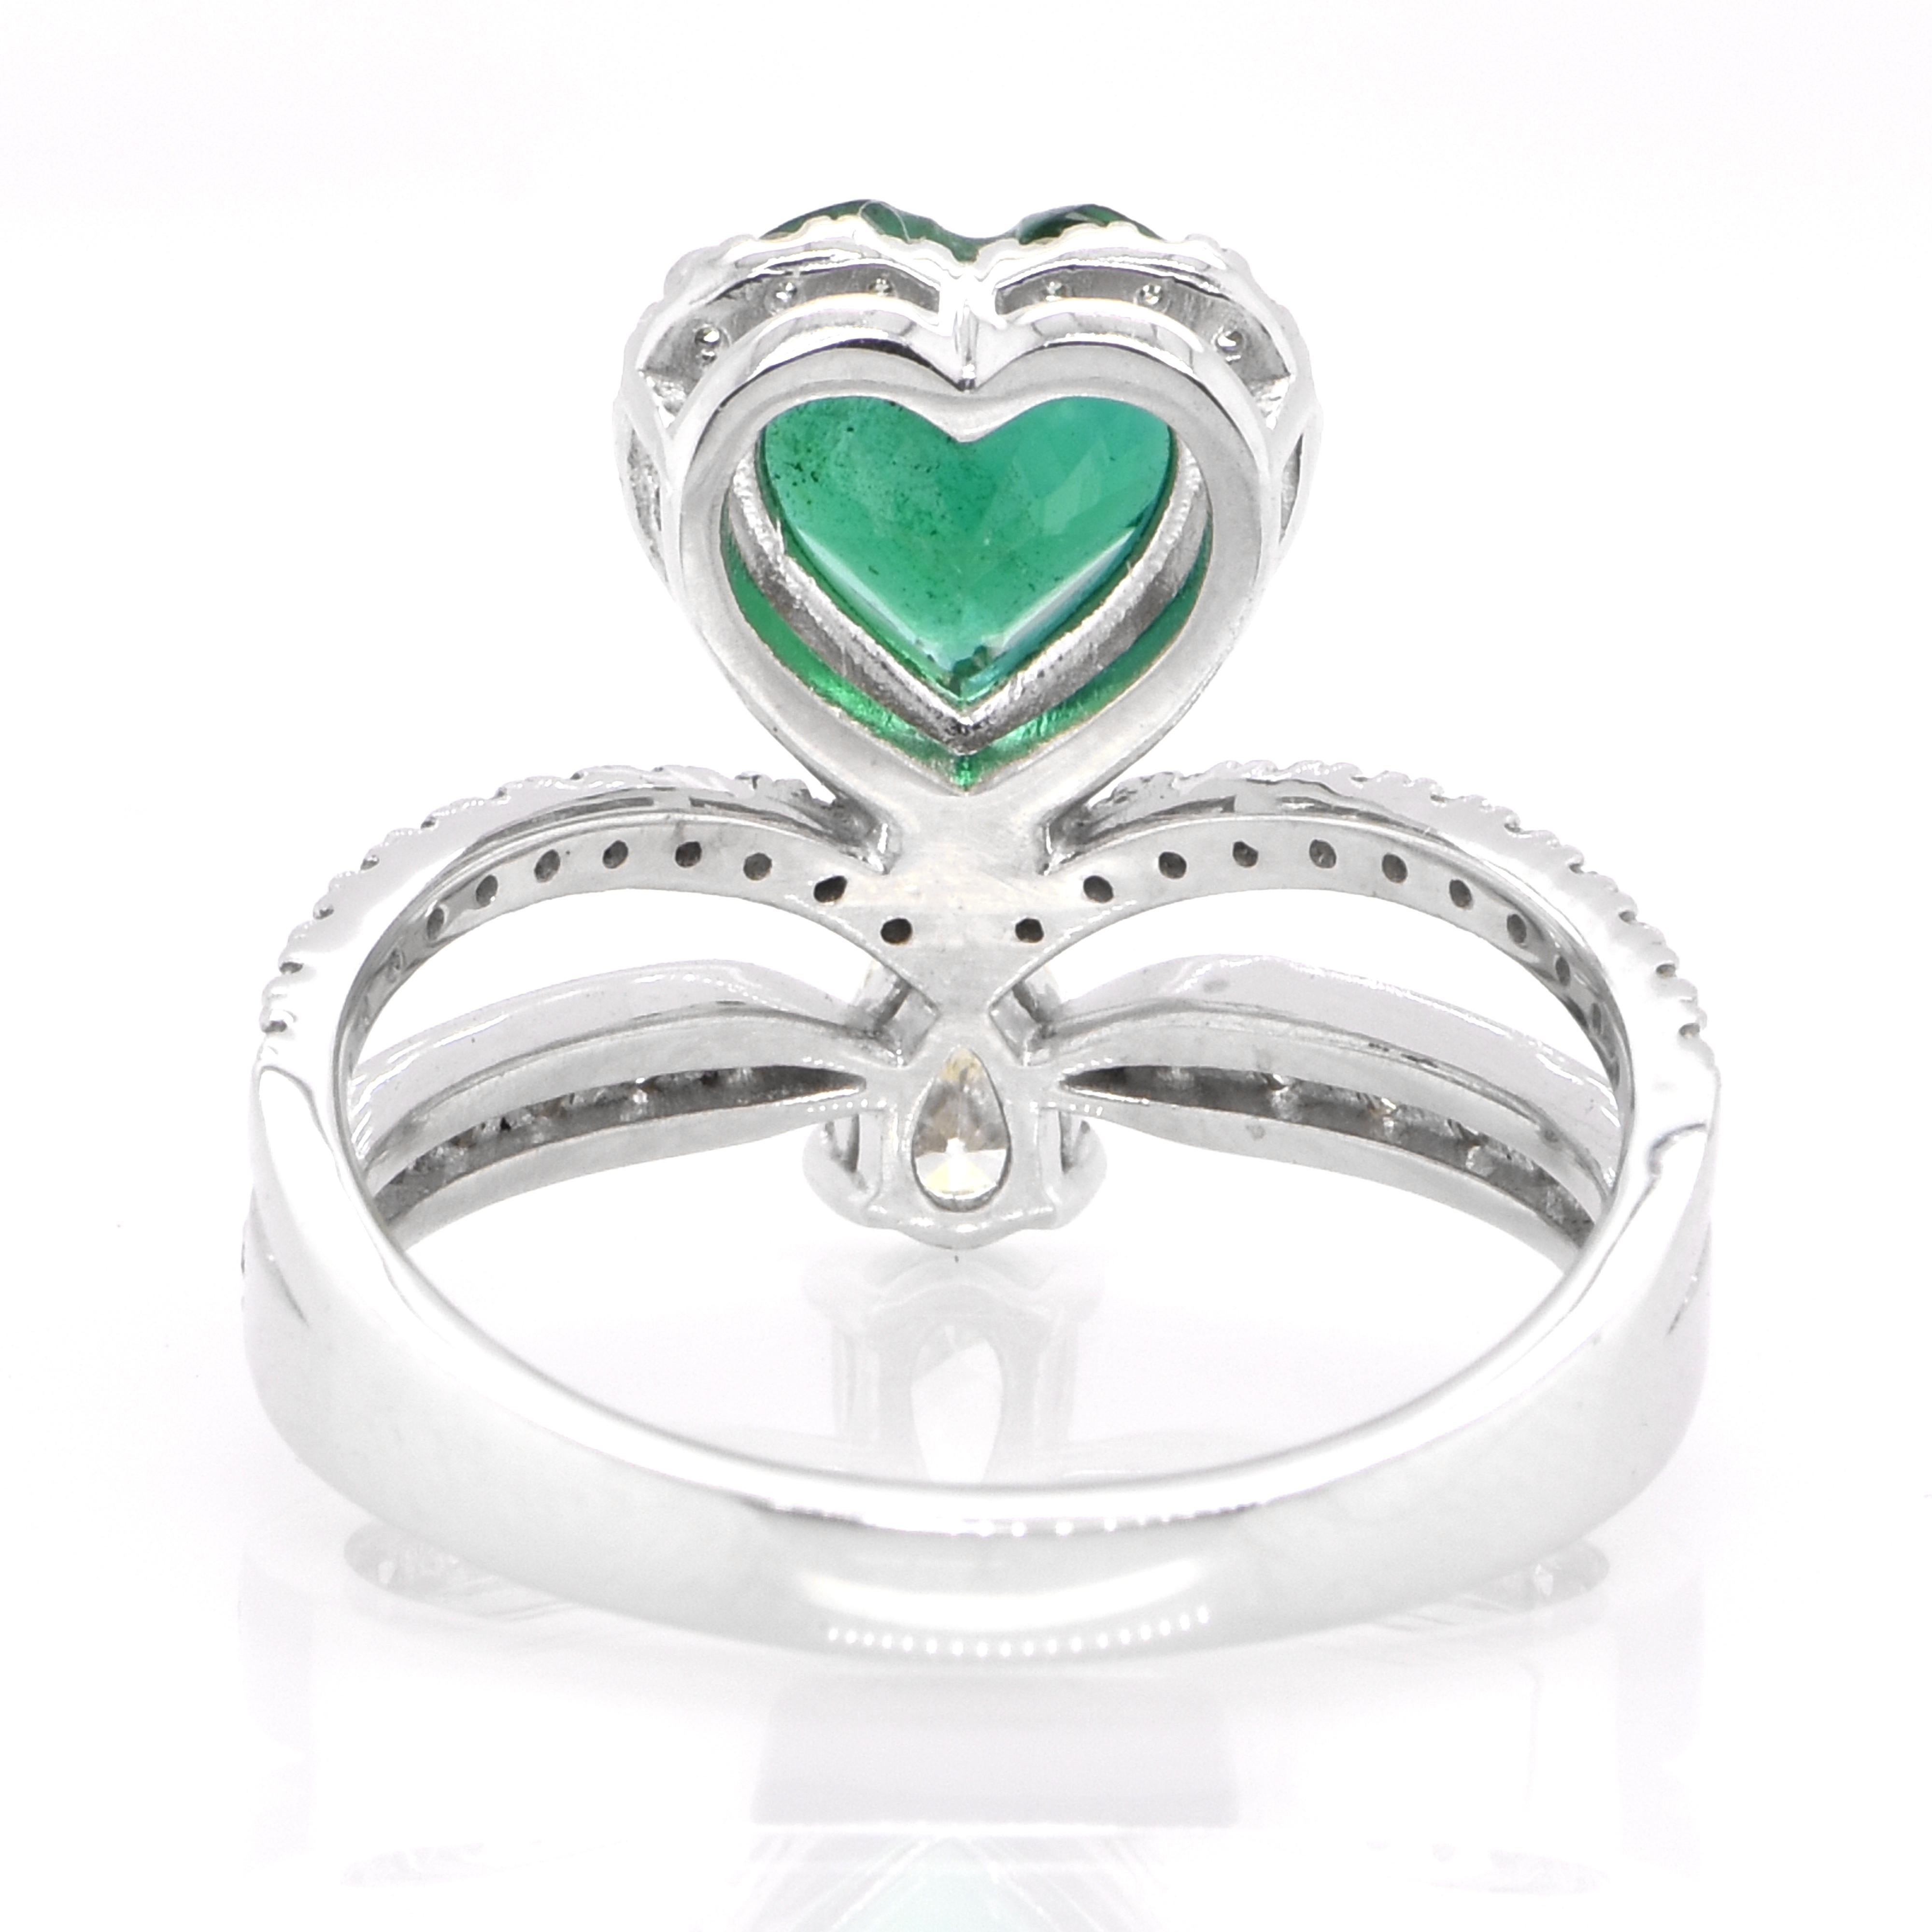 Women's 1.20 Carat Heart-Cut, Zambian Emerald and Diamond Crown Ring Set in Platinum For Sale